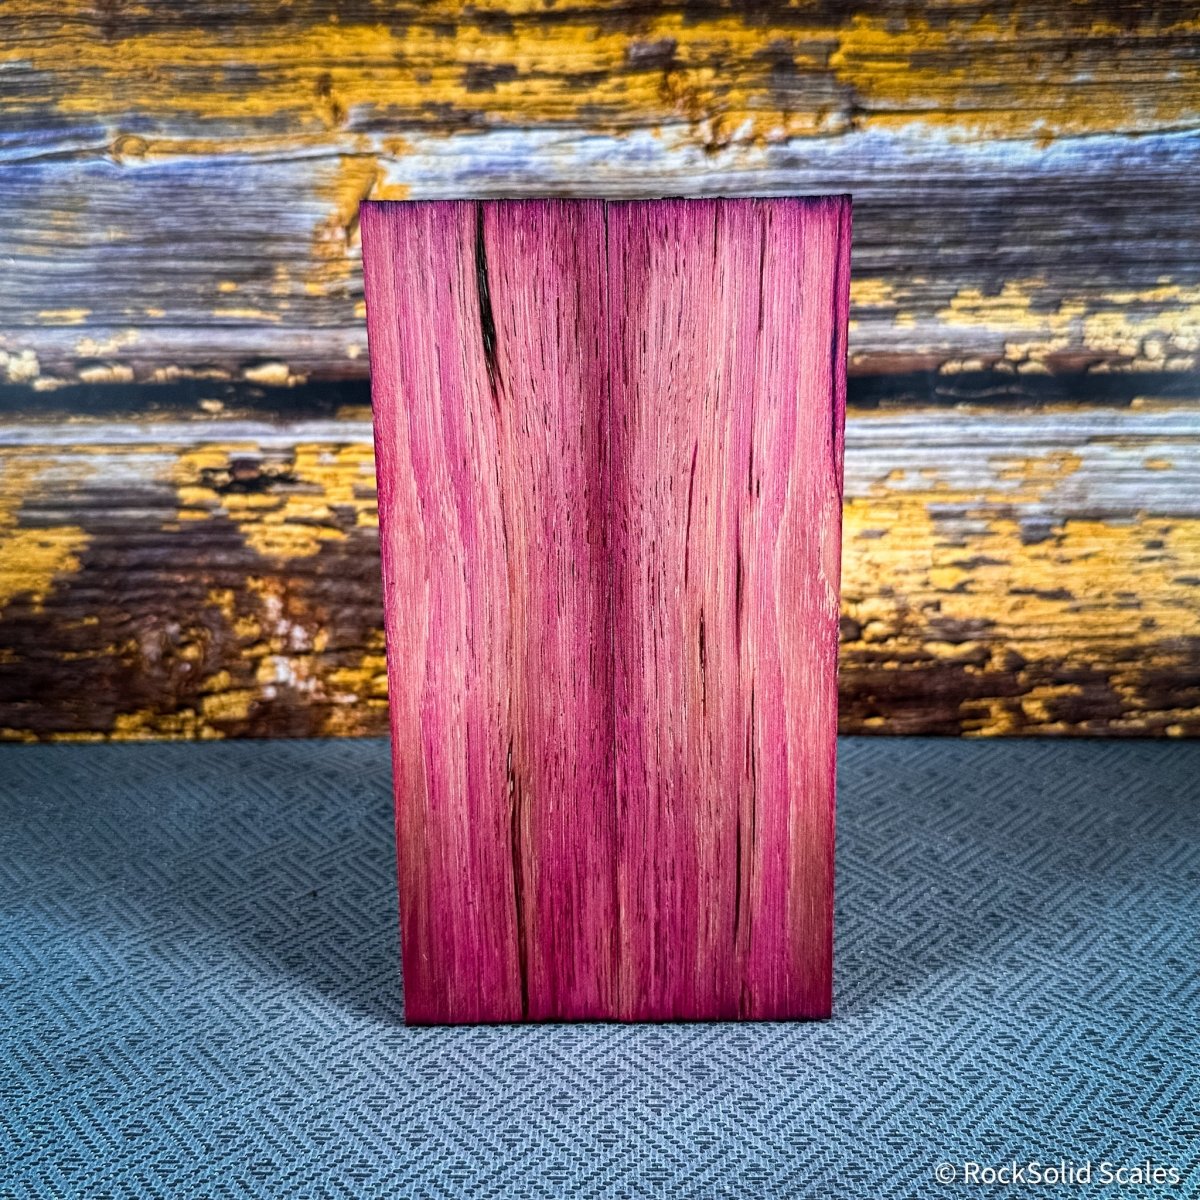 #2437 - Pink Spalted Pecan - RockSolid Scales -